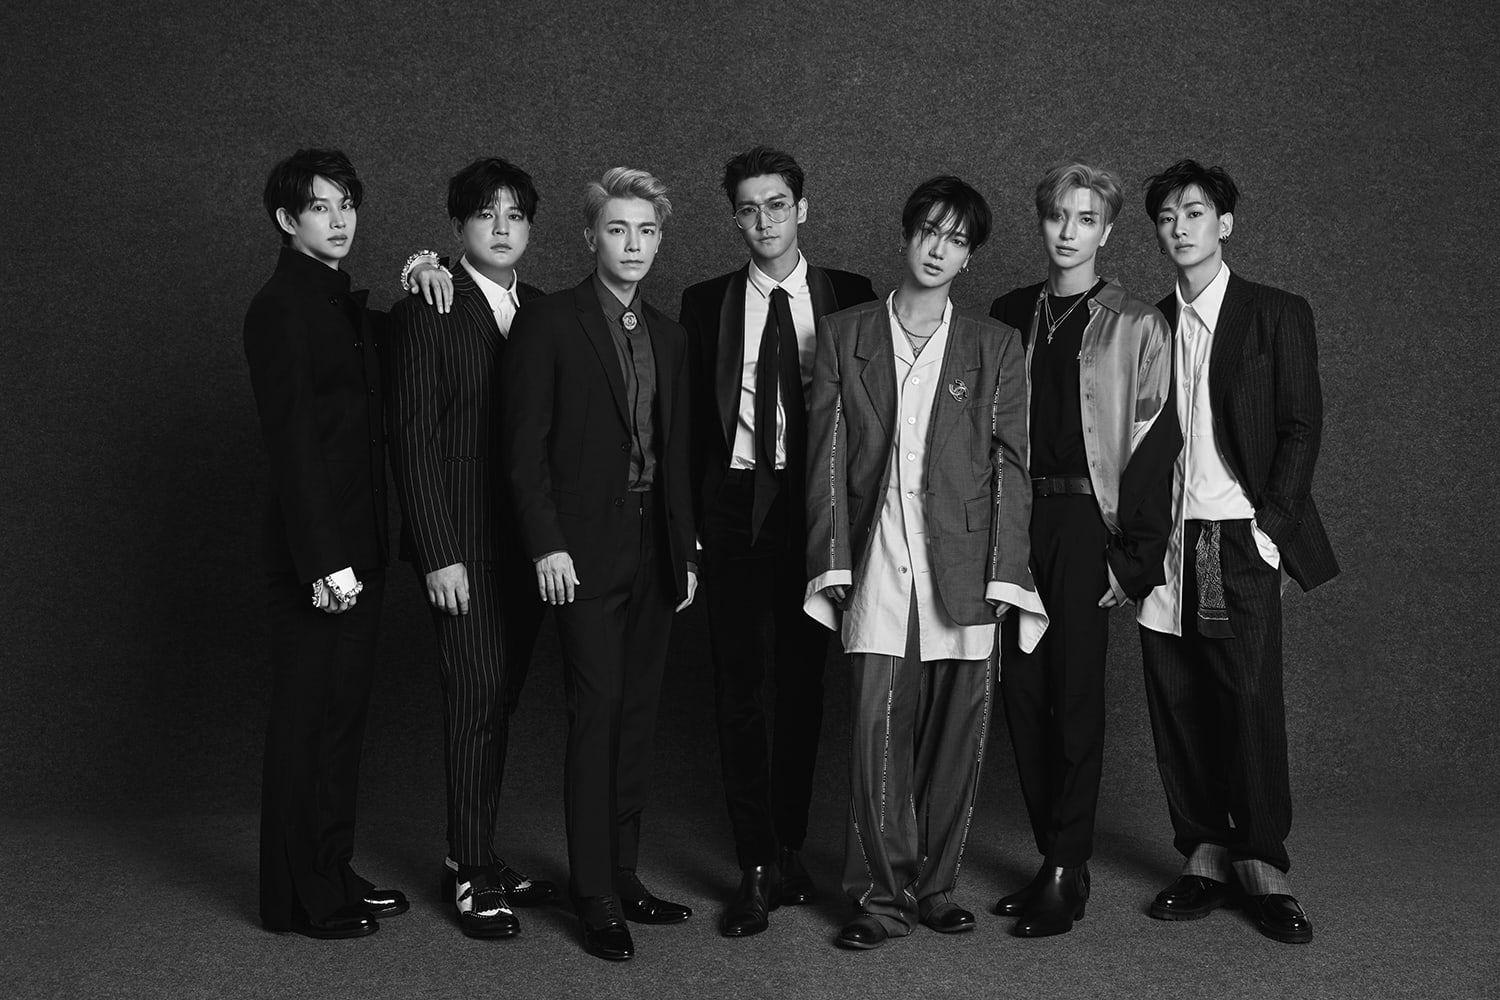 Super Junior reveal the first group teasers for their upcoming 8th